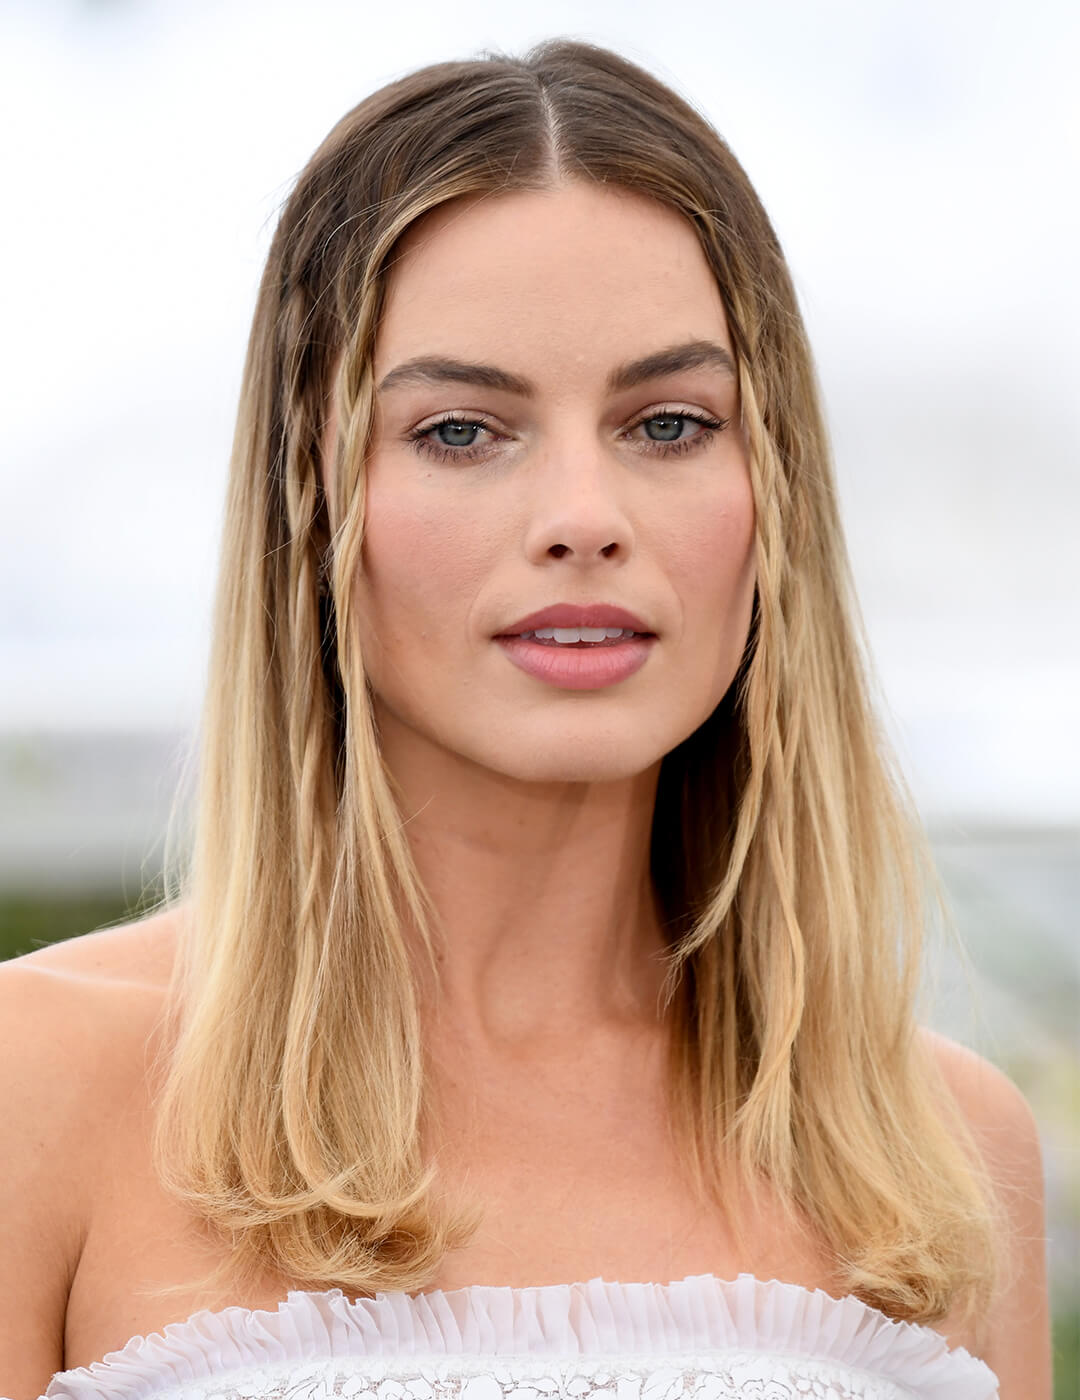 Margot Robbie rocking a boho-inpsired hairstyle at the beach